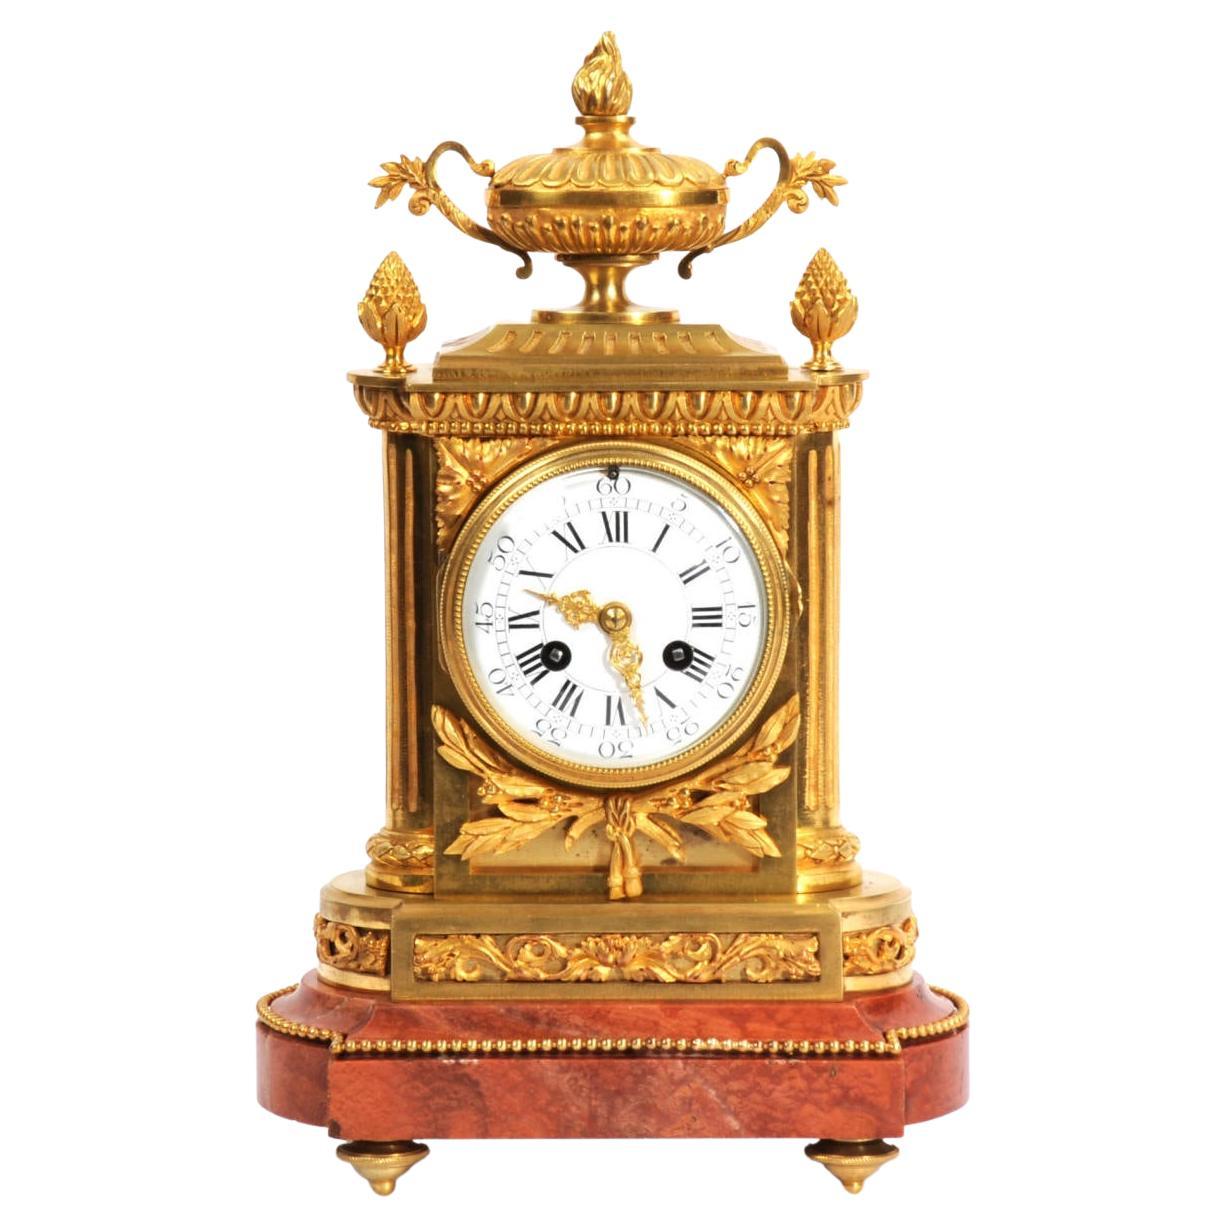 Ormolu and Marble Louis XVI Antique French Clock by Charpentier & Cie, Paris